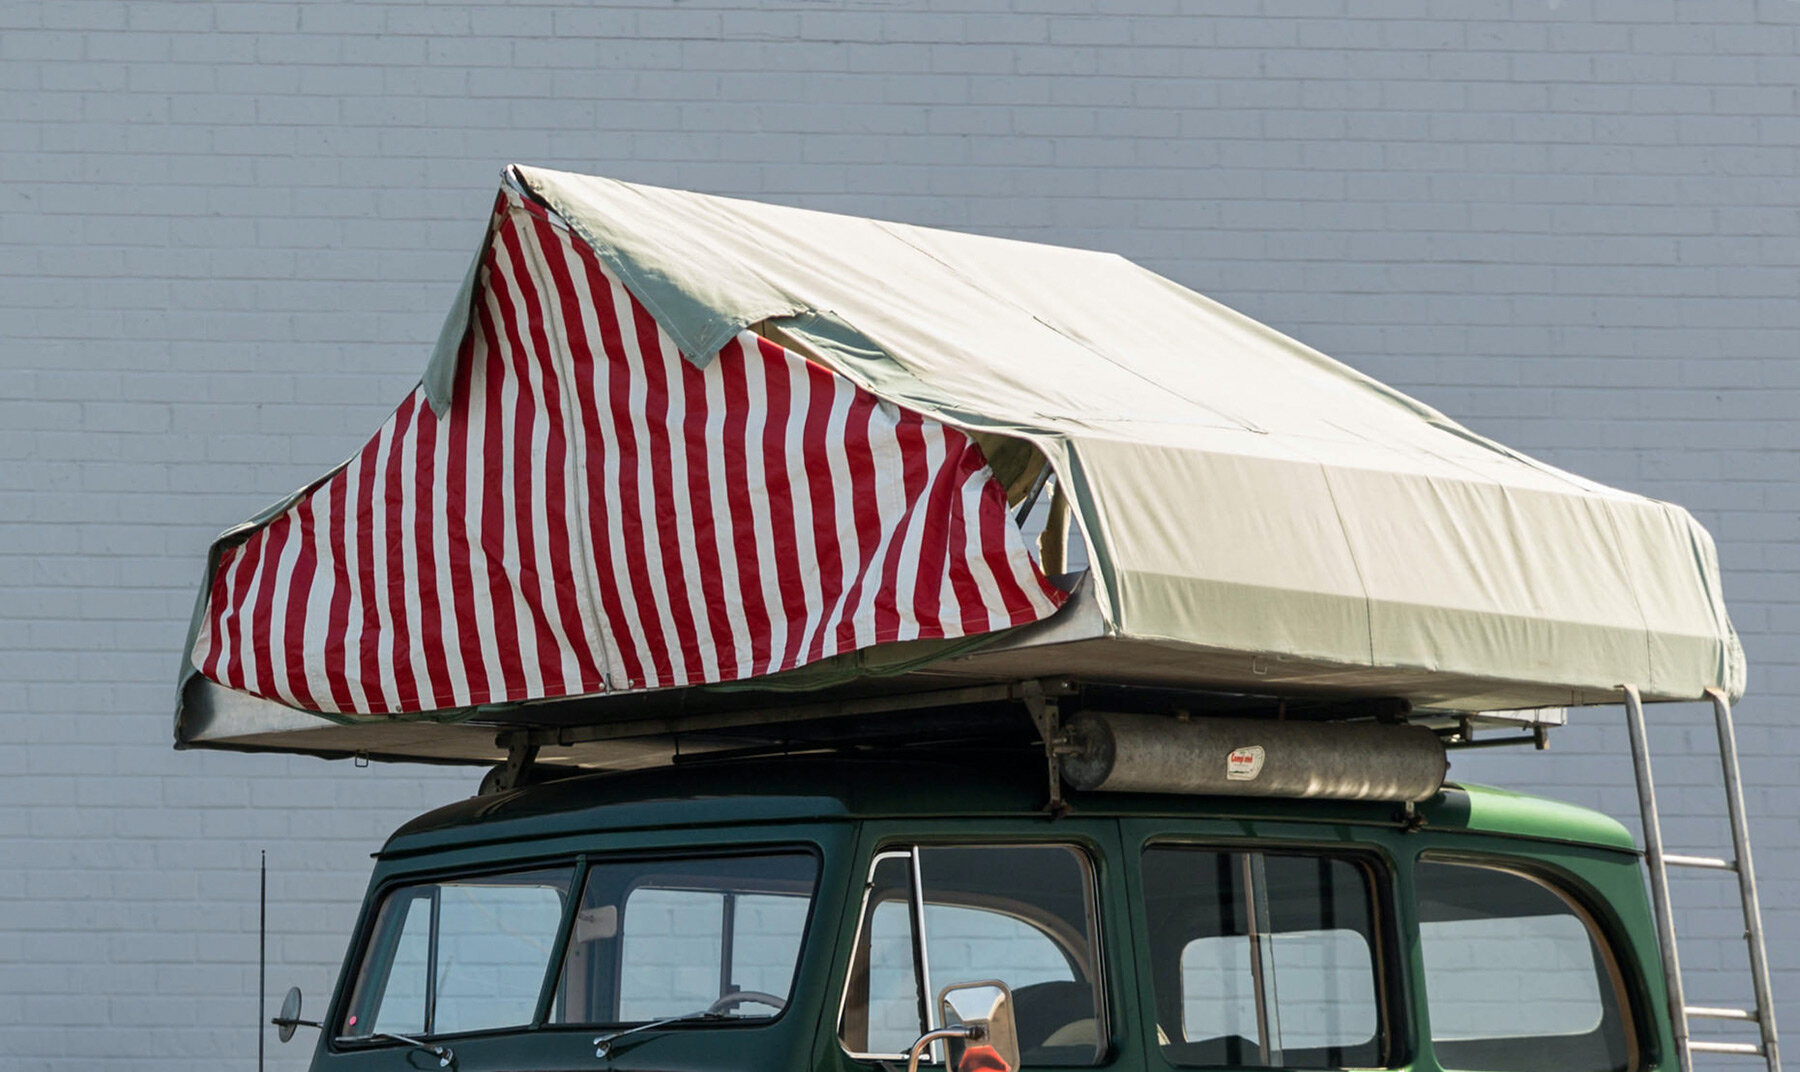 automobile camping: from collapsible A-frame tents to hard-sided carbon  fiber campers